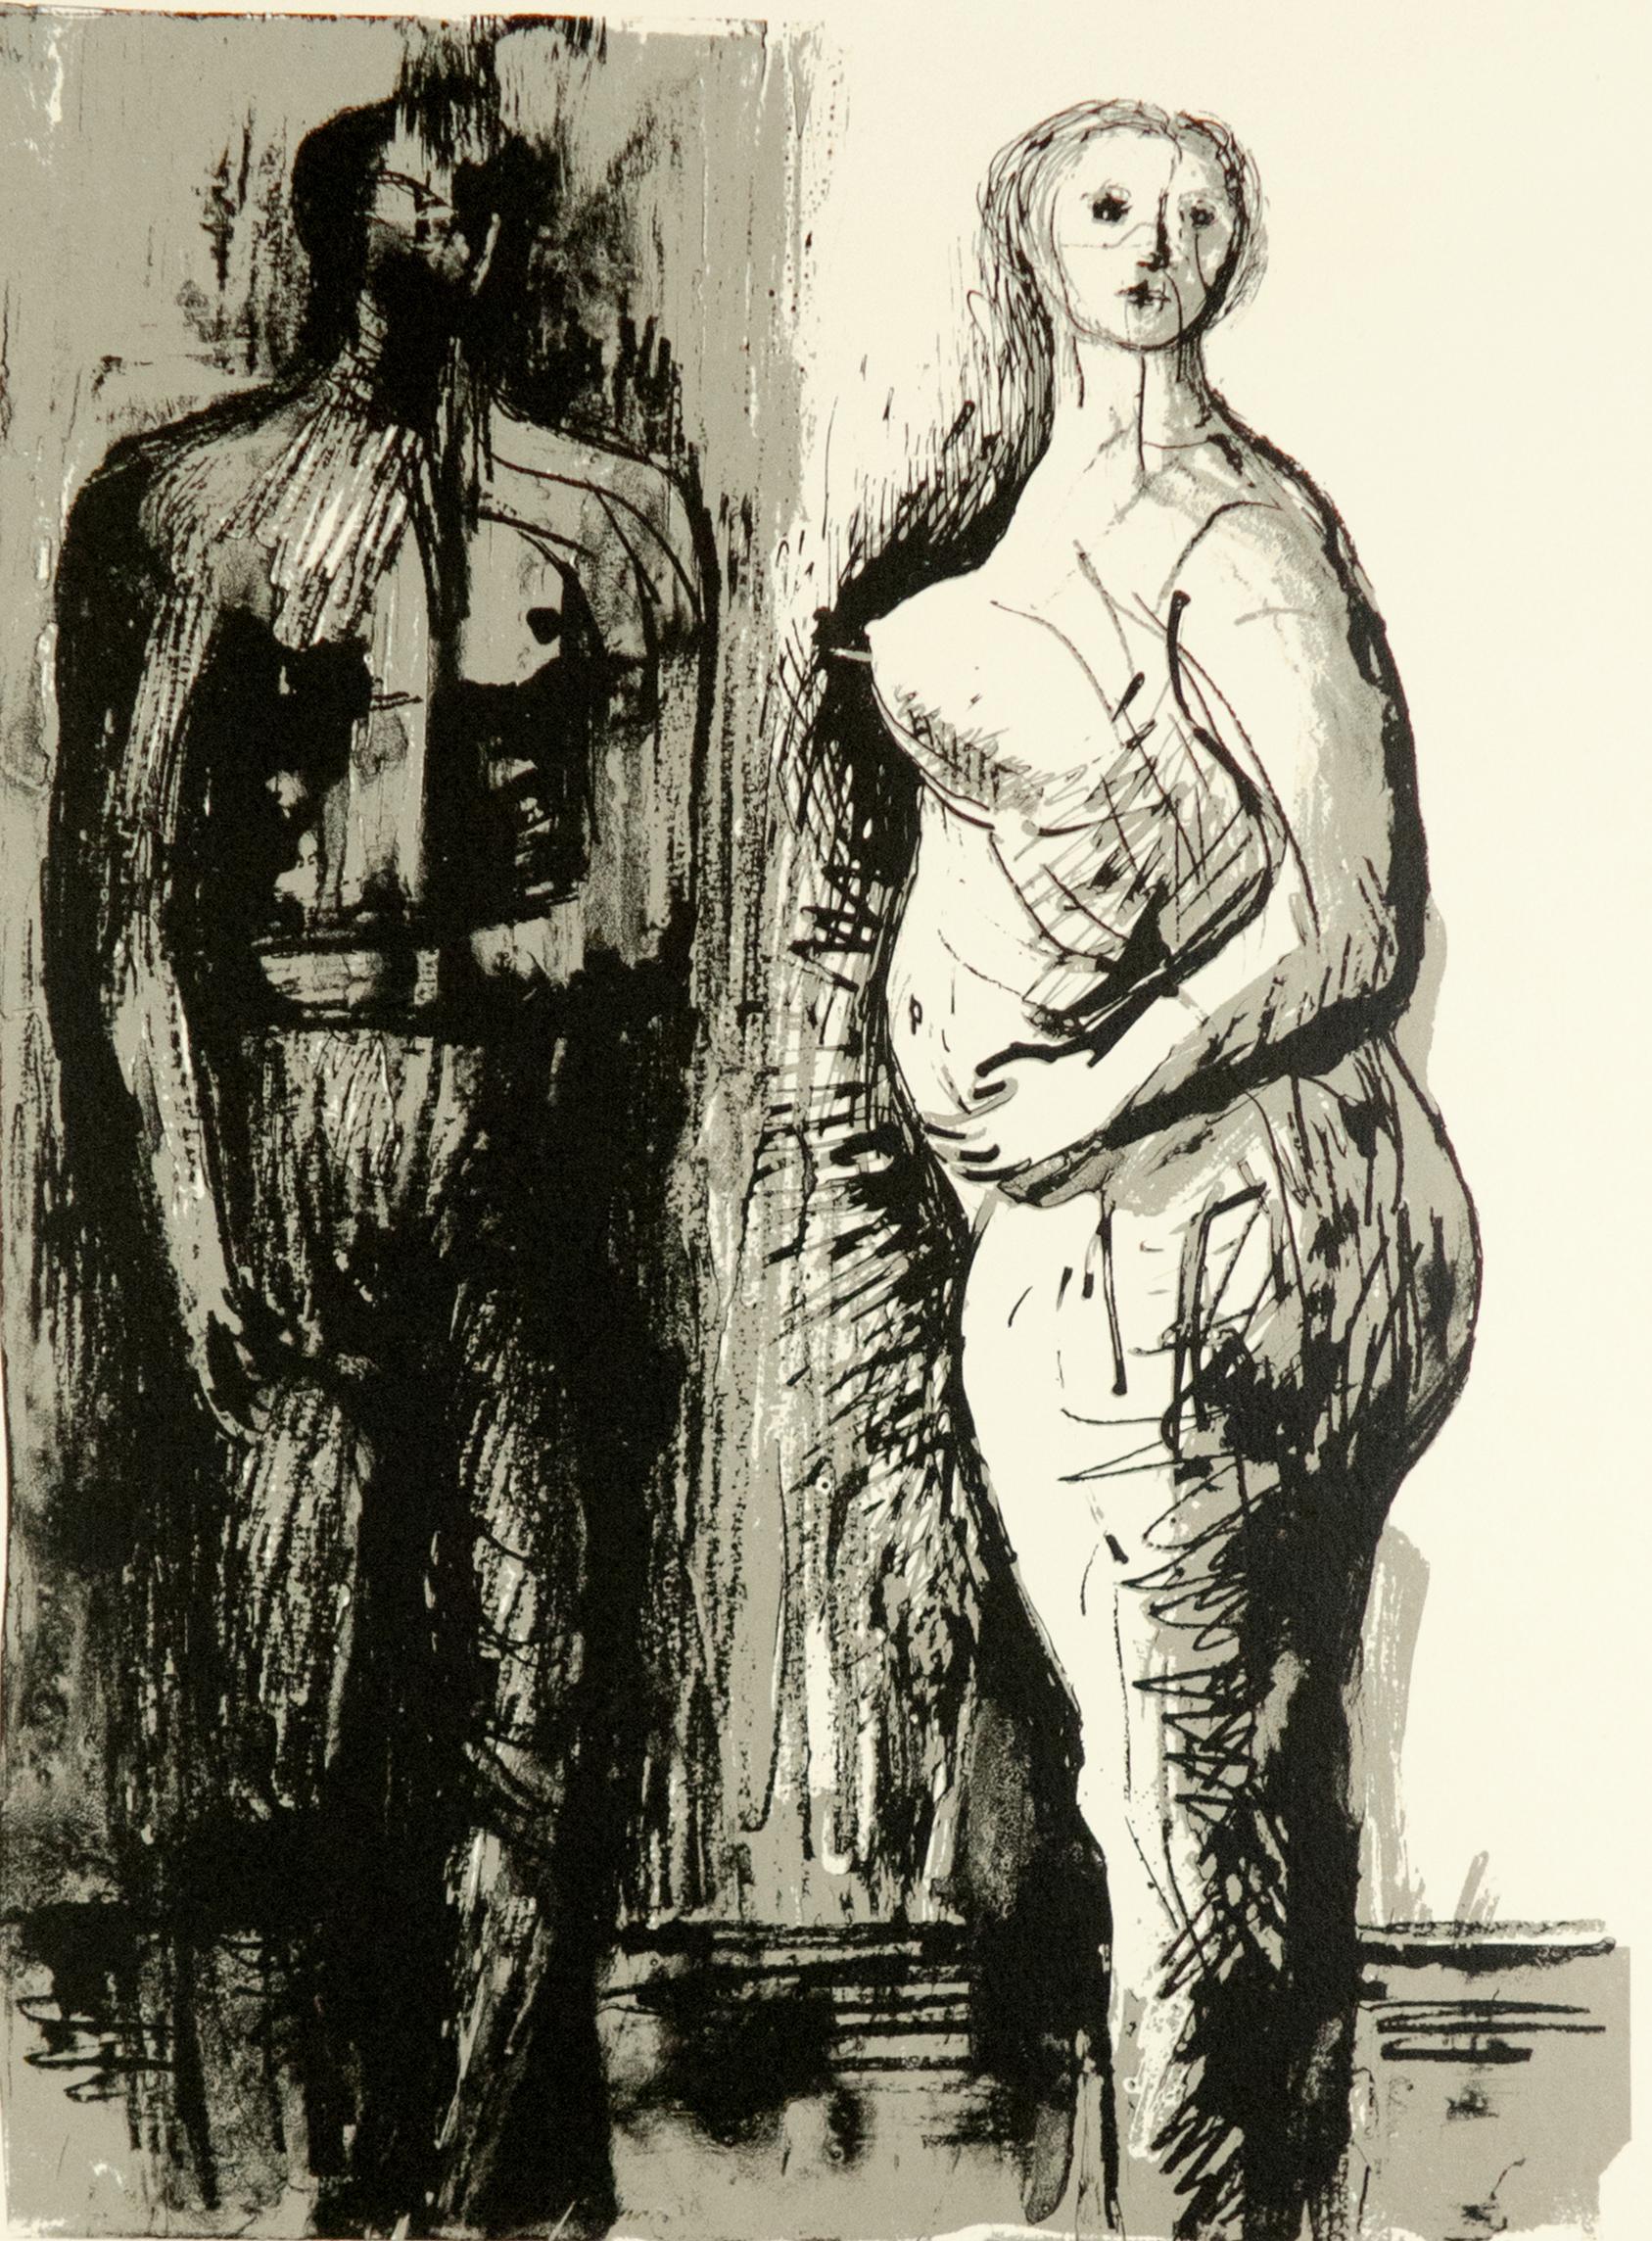 Man and Woman Henry Moore nude figure drawing for  W.H. Auden poetry book 